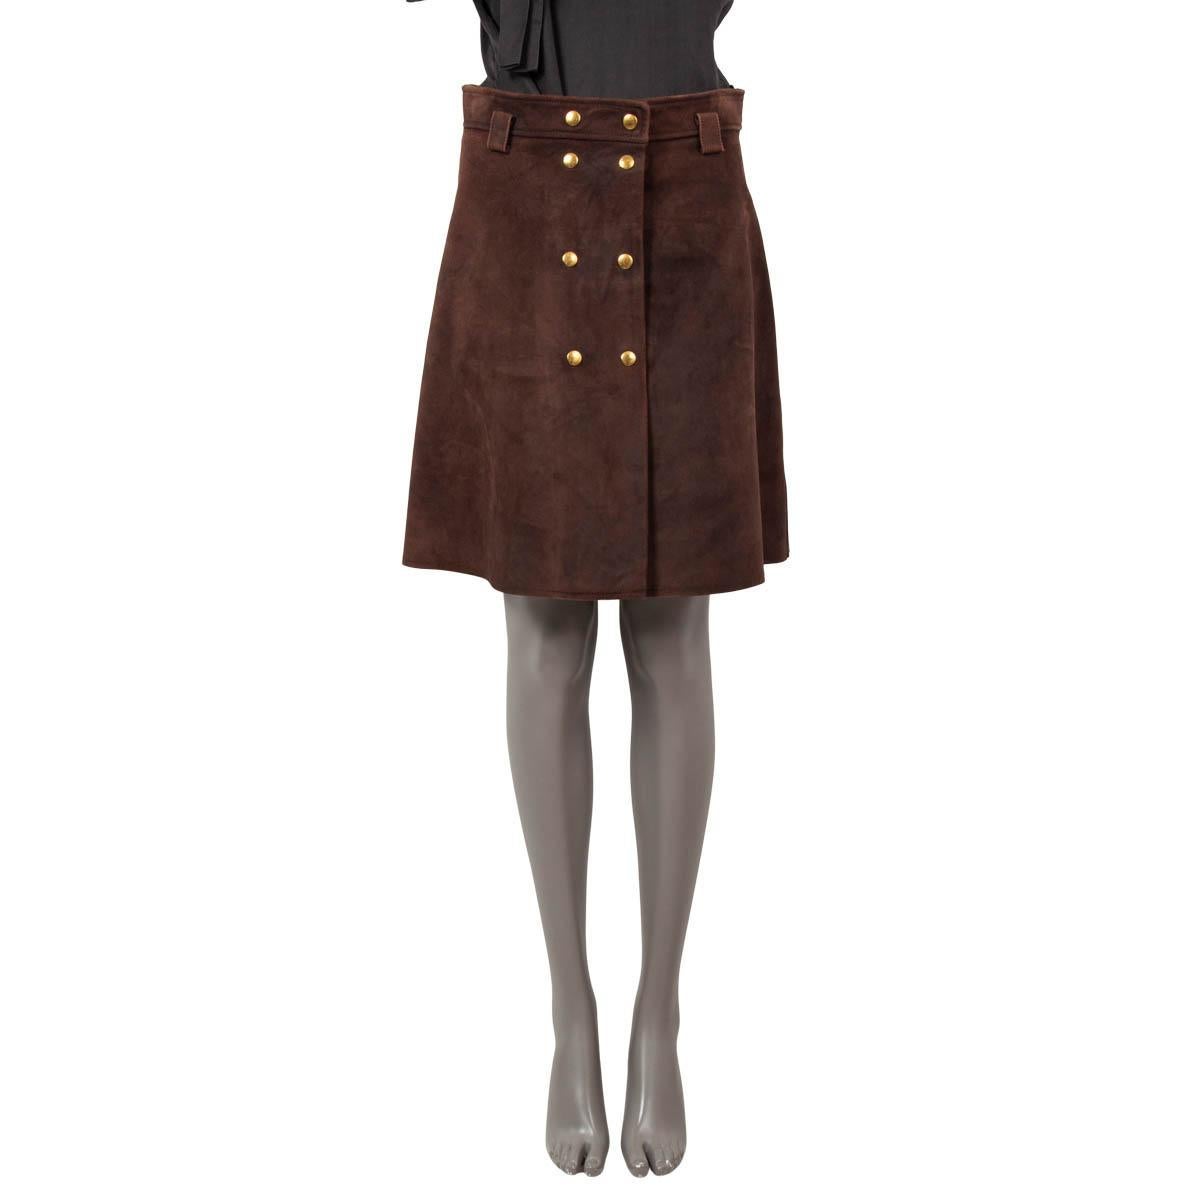 100% authentic Louis Vuitton mini A-line skirt in brown suede calfskin leather (100%) with belt loops. Opens with gold snap buttons on the front. Has been worn and shows press marks from the hanger as well as overall signs of use.

Measurements
Tag